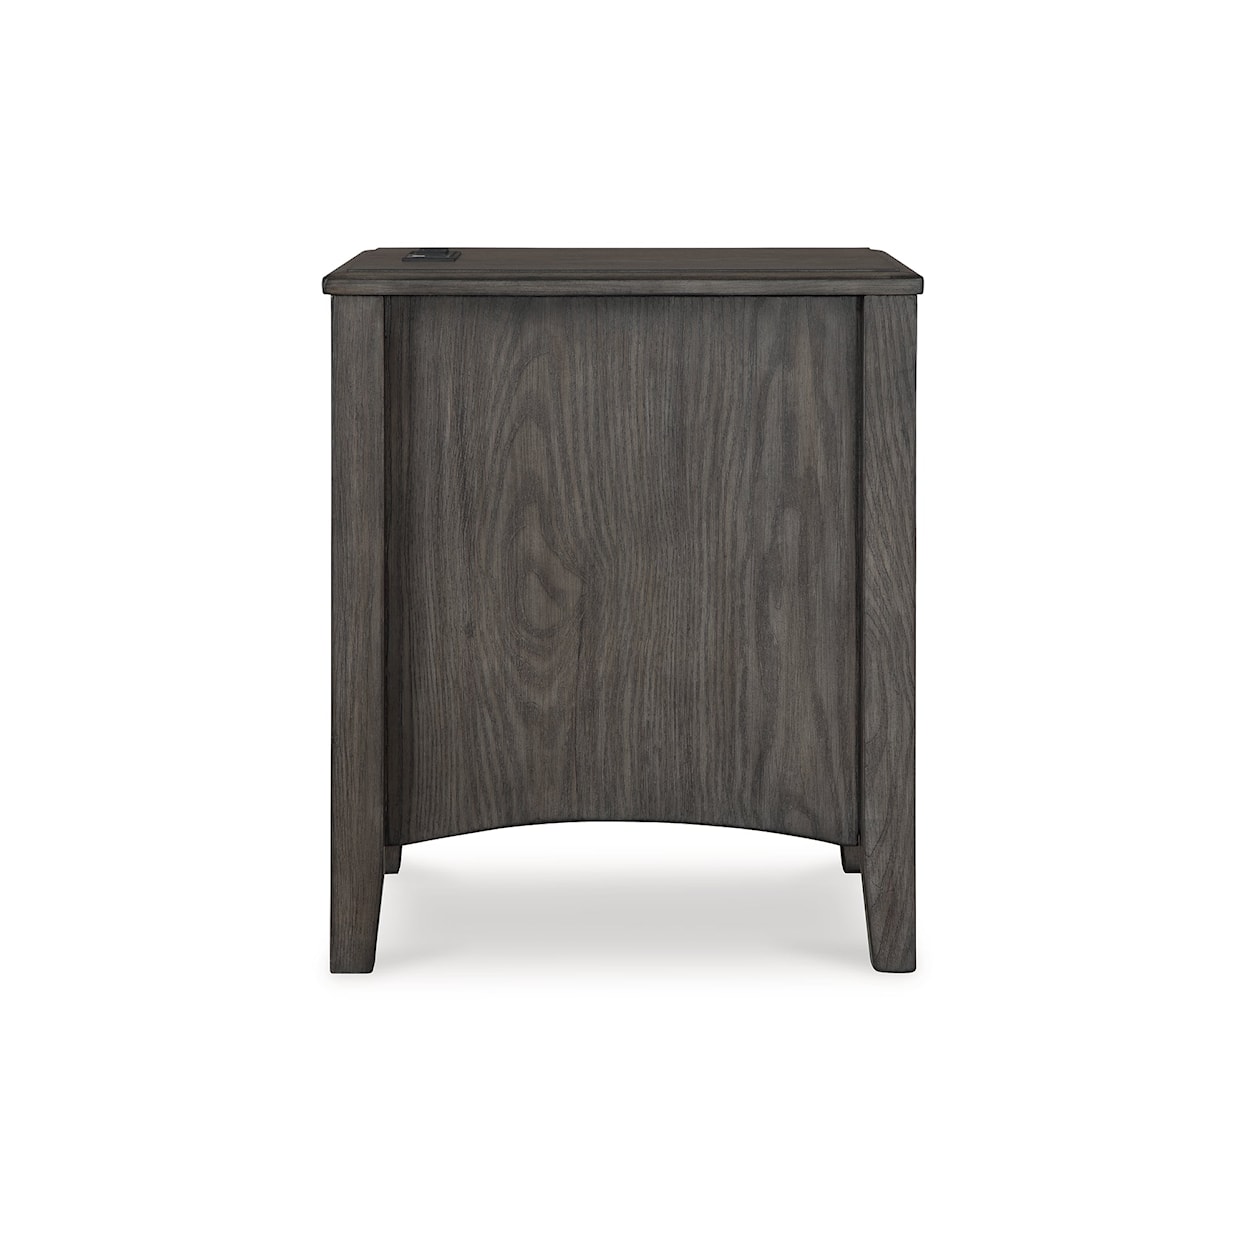 Signature Design by Ashley Furniture Montillan Chairside End Table